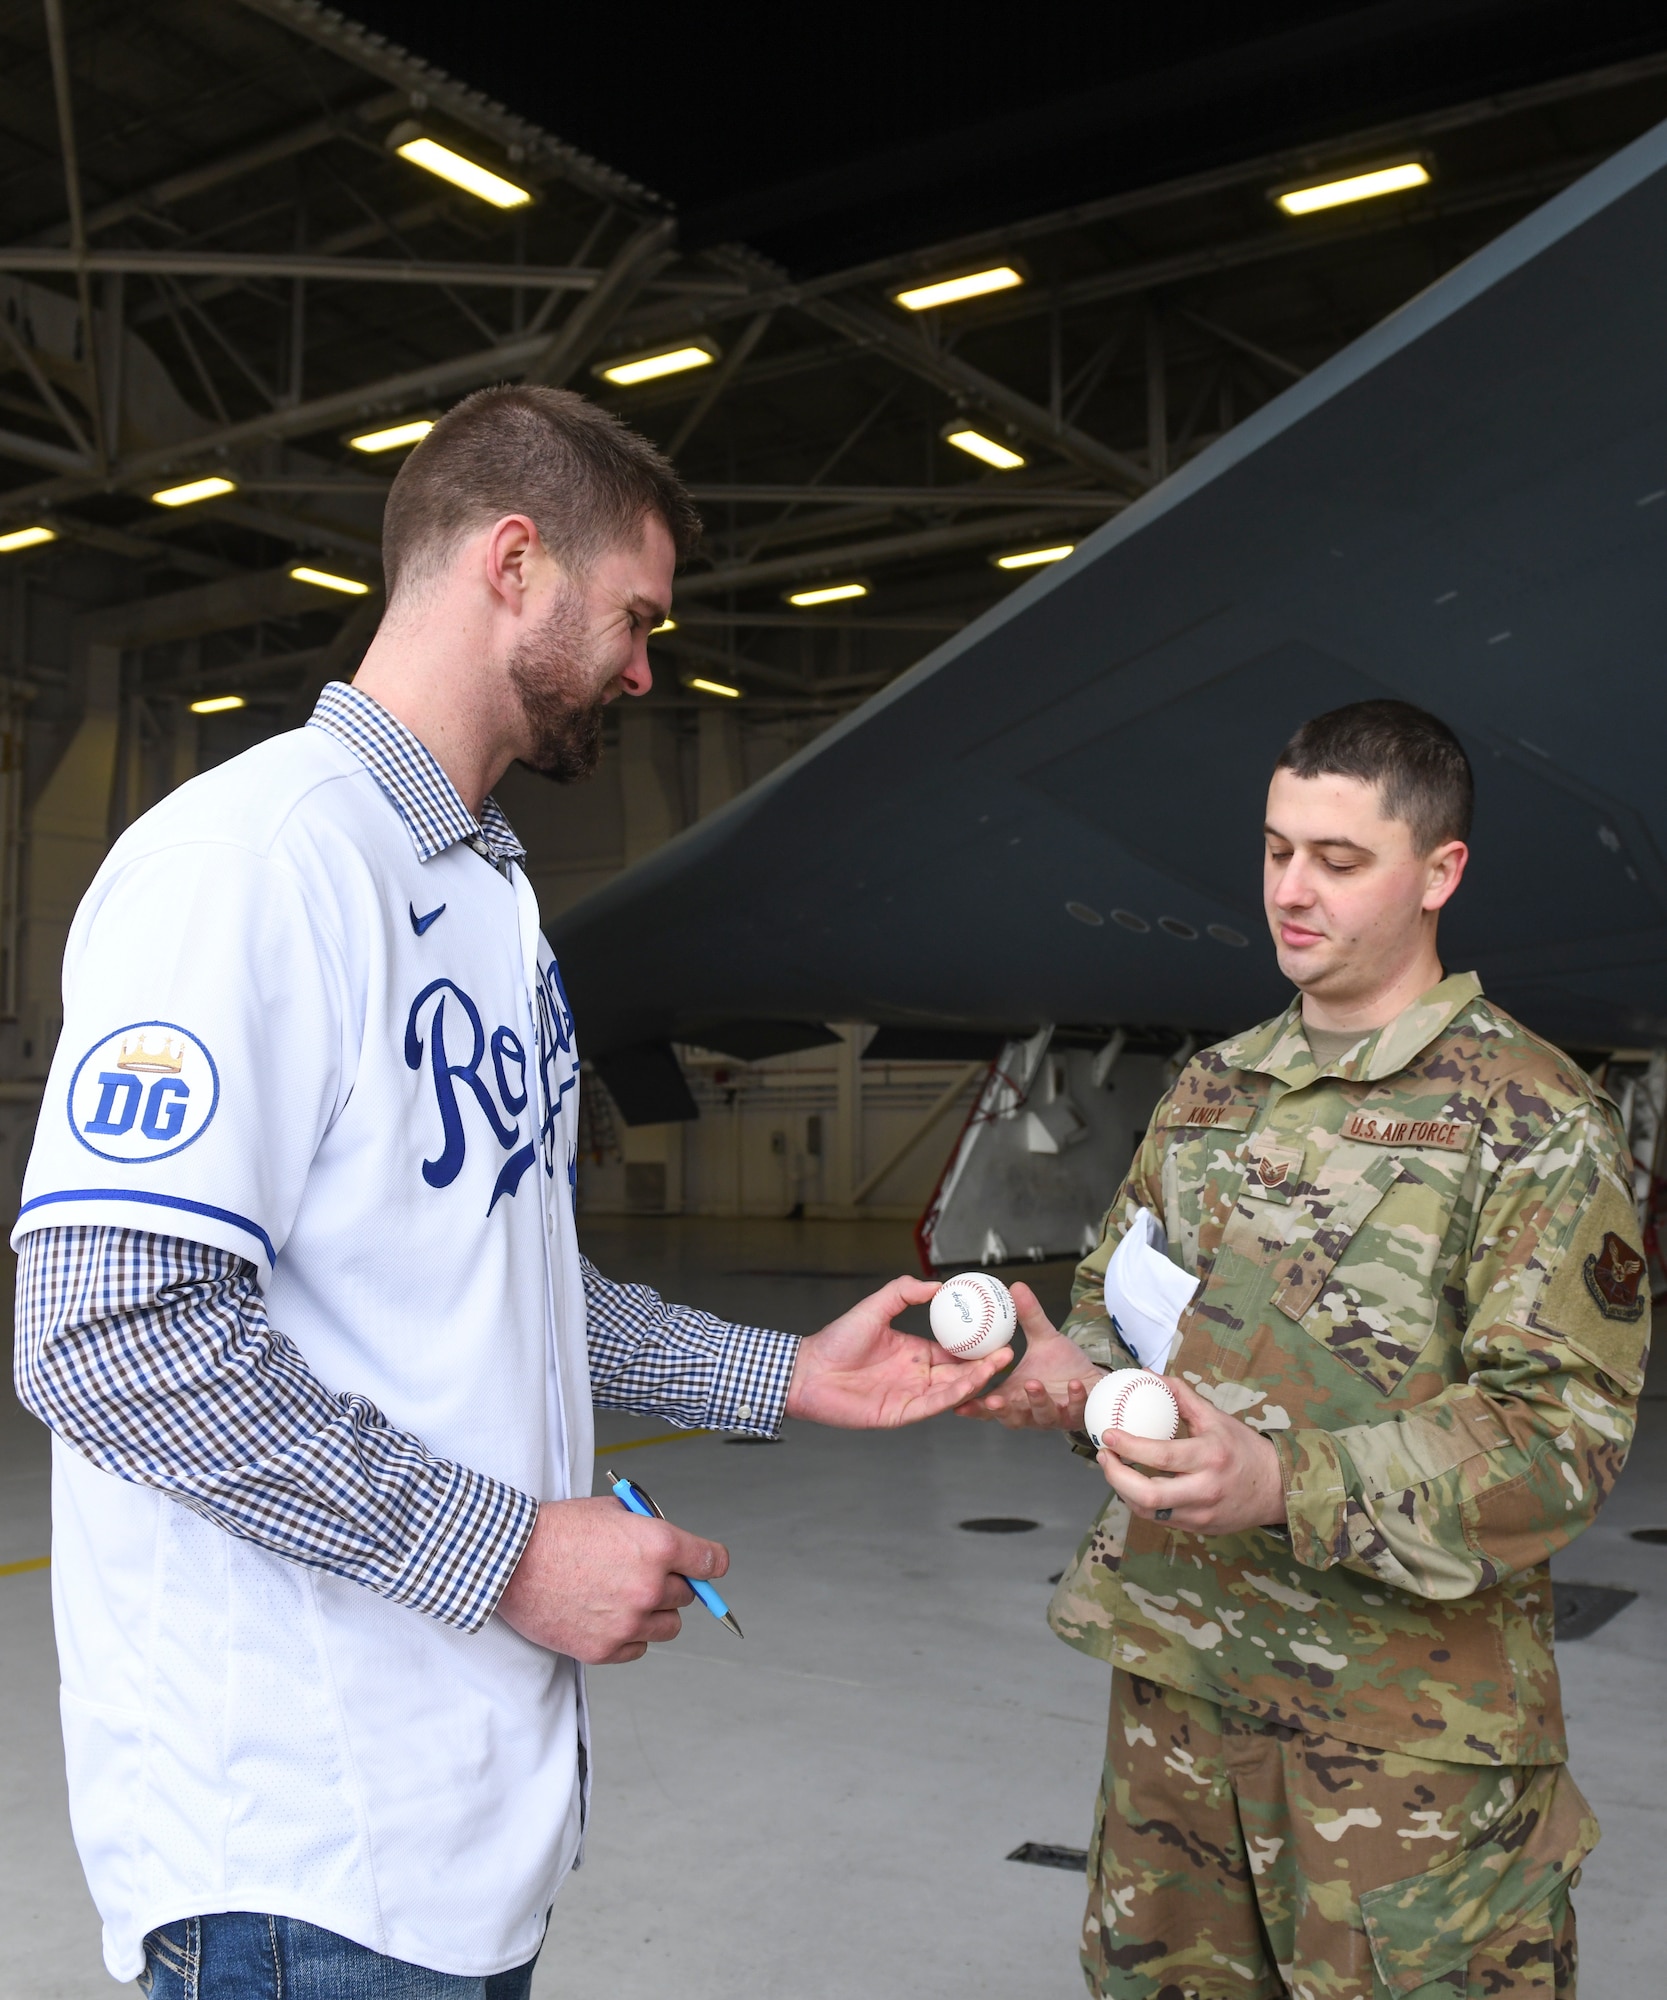 Derek “Bubba” Starling, left, a Kansas City Royals outfielder, gives U.S. Air Force Tech. Sgt. David Knox, right, a 509th Maintenance Group aerospace ground equipment inspections section chief, a signed baseball during a team visit at Whiteman Air Force Base, Mo., Jan. 30, 2020. During the visit, KC Royals team members ate lunch with Airmen, toured a B-2 Spirit Stealth Bomber and participated in a meet and greet while learning about the Airmen and the jobs they perform. (U.S. Air Force photo by Staff Sgt. Sadie Colbert)